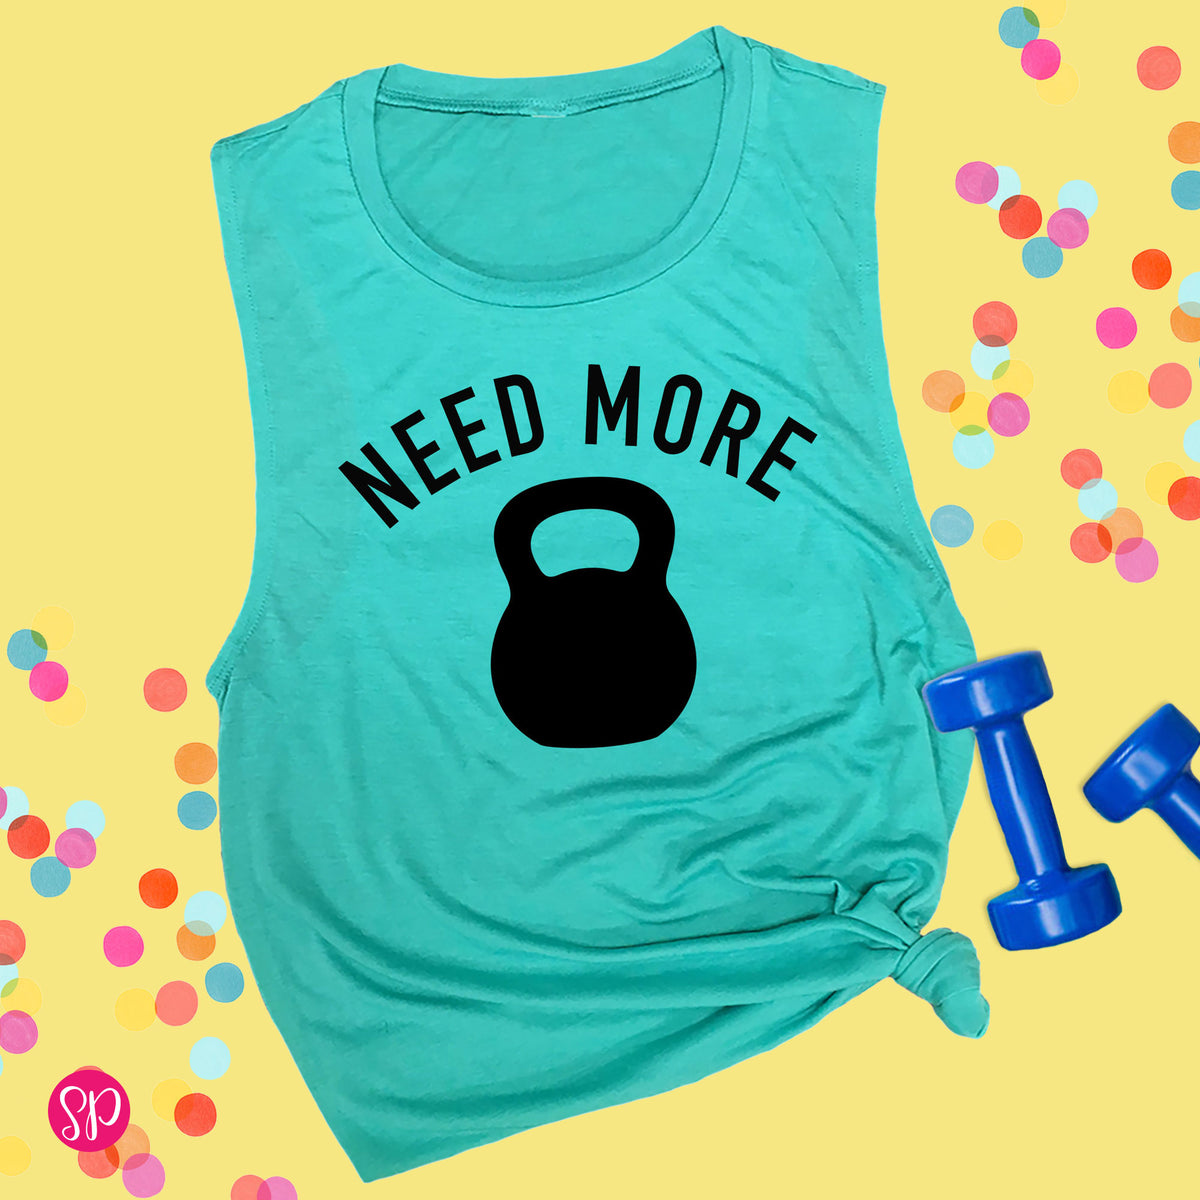 Need More Kettlebell Funny Pun Workout Fitness Instructor Graphic Tank Top Tee Shirt